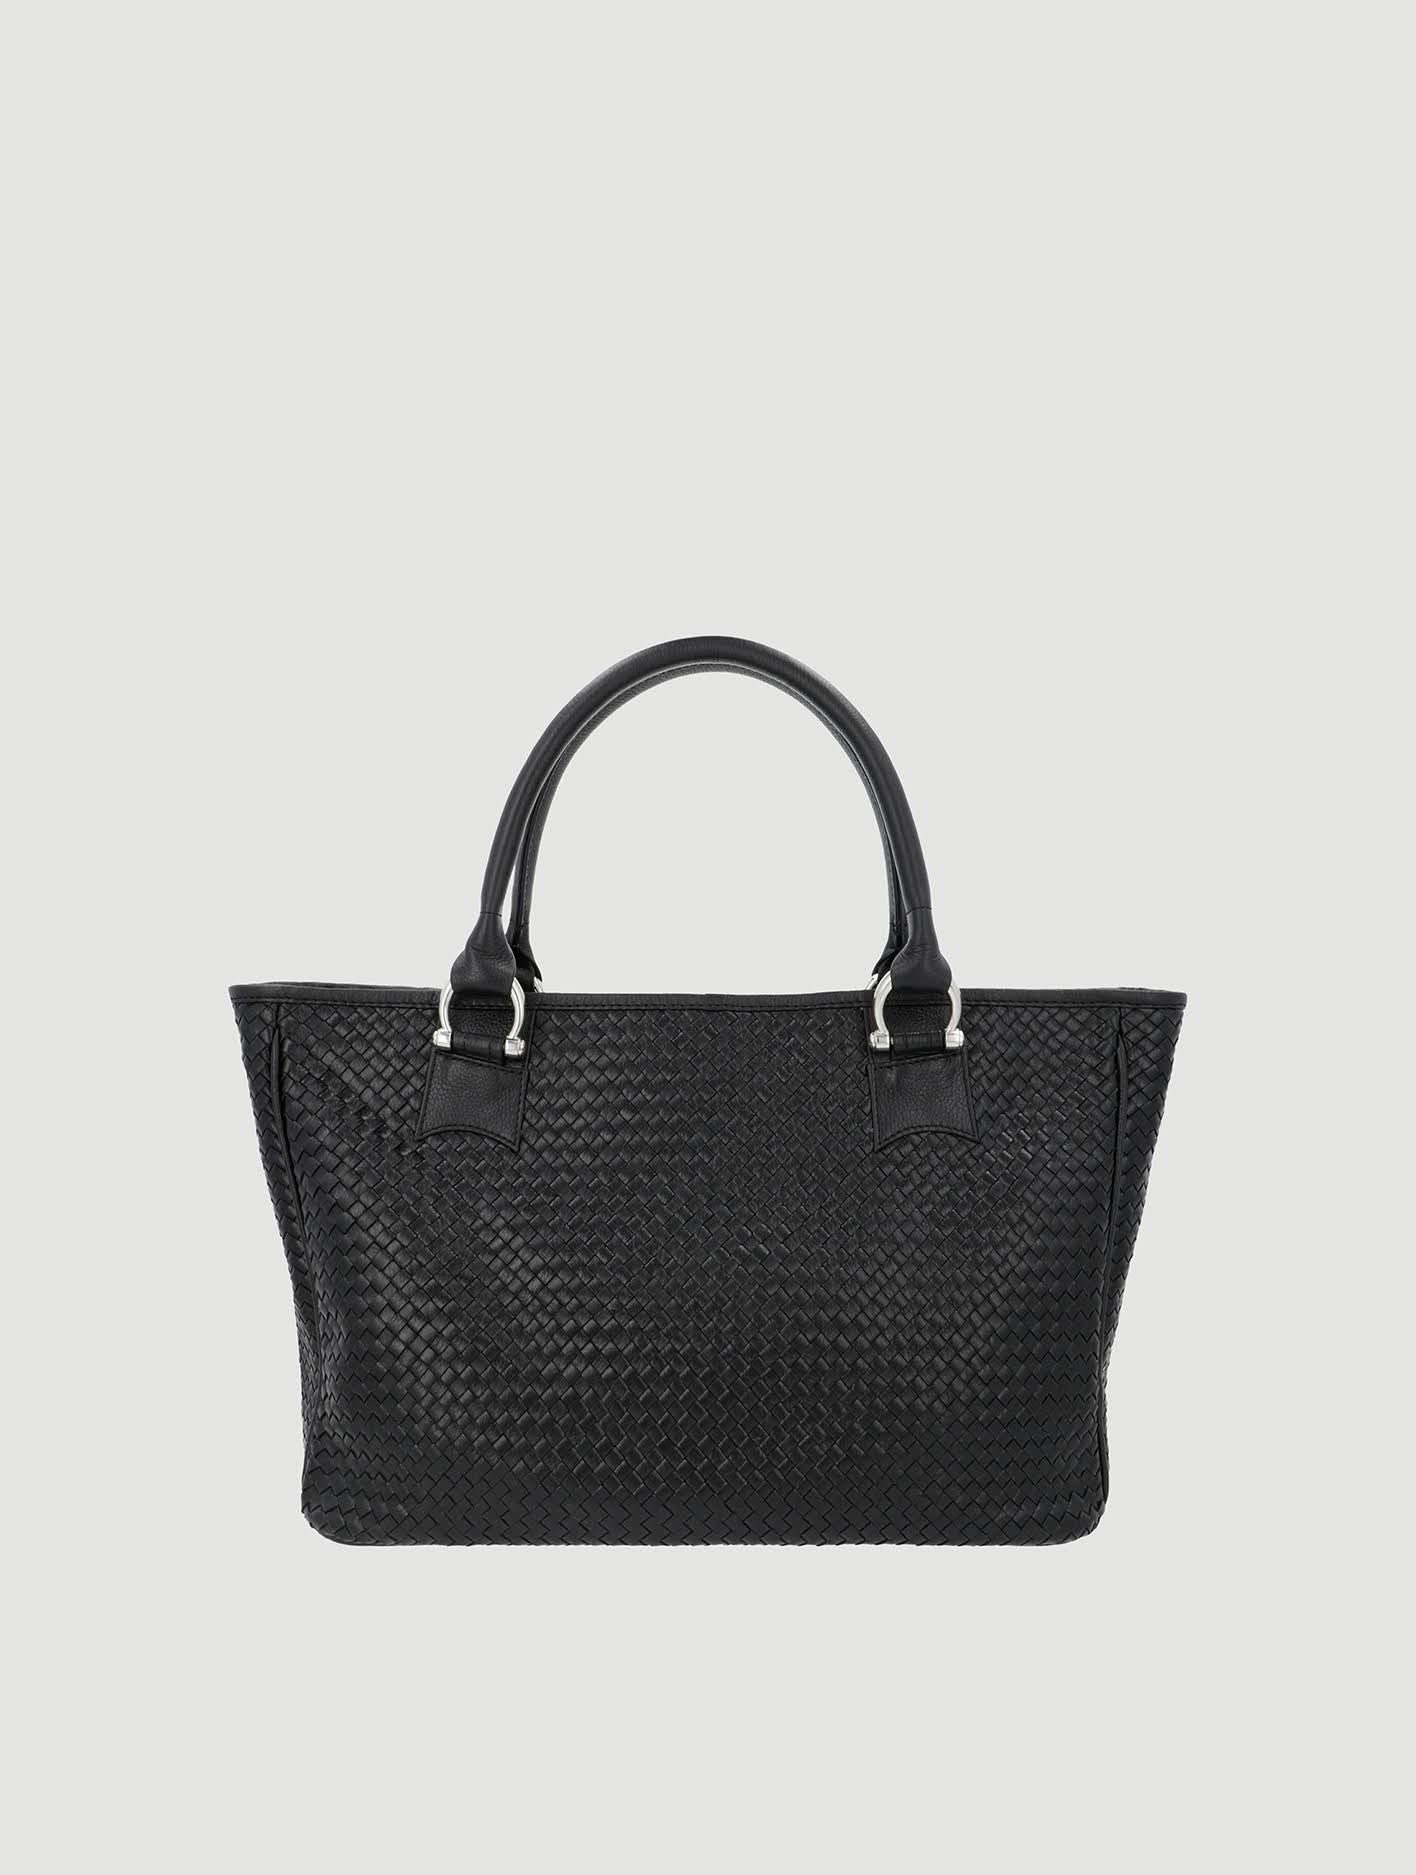 Black Leather Woven Tote bag